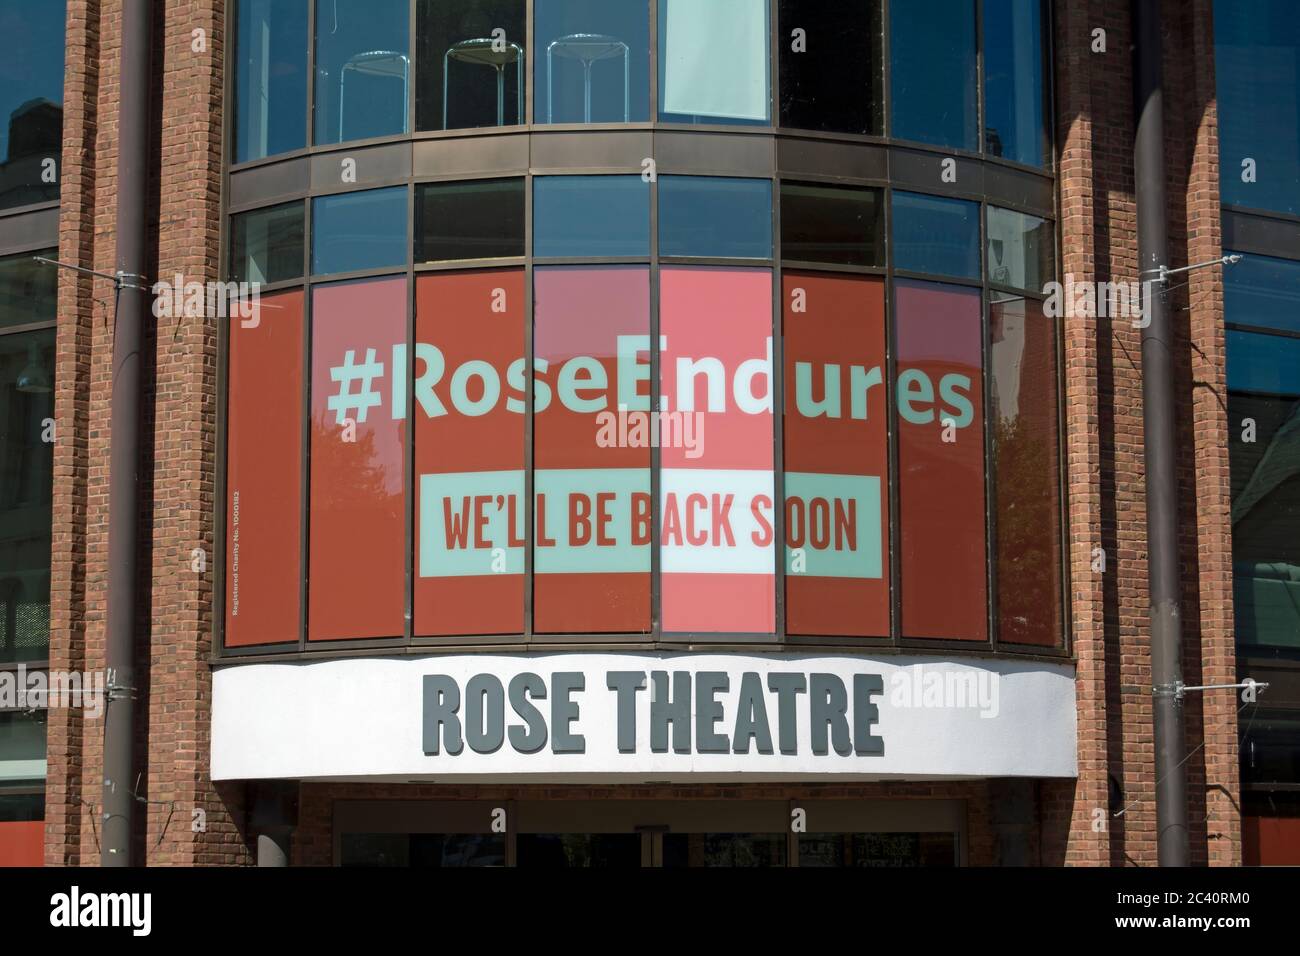 exterior of the rose theatre in kingston upon thames, surrey, england, with rose endures, we'll be back soon, message following the covid19 lockdown Stock Photo